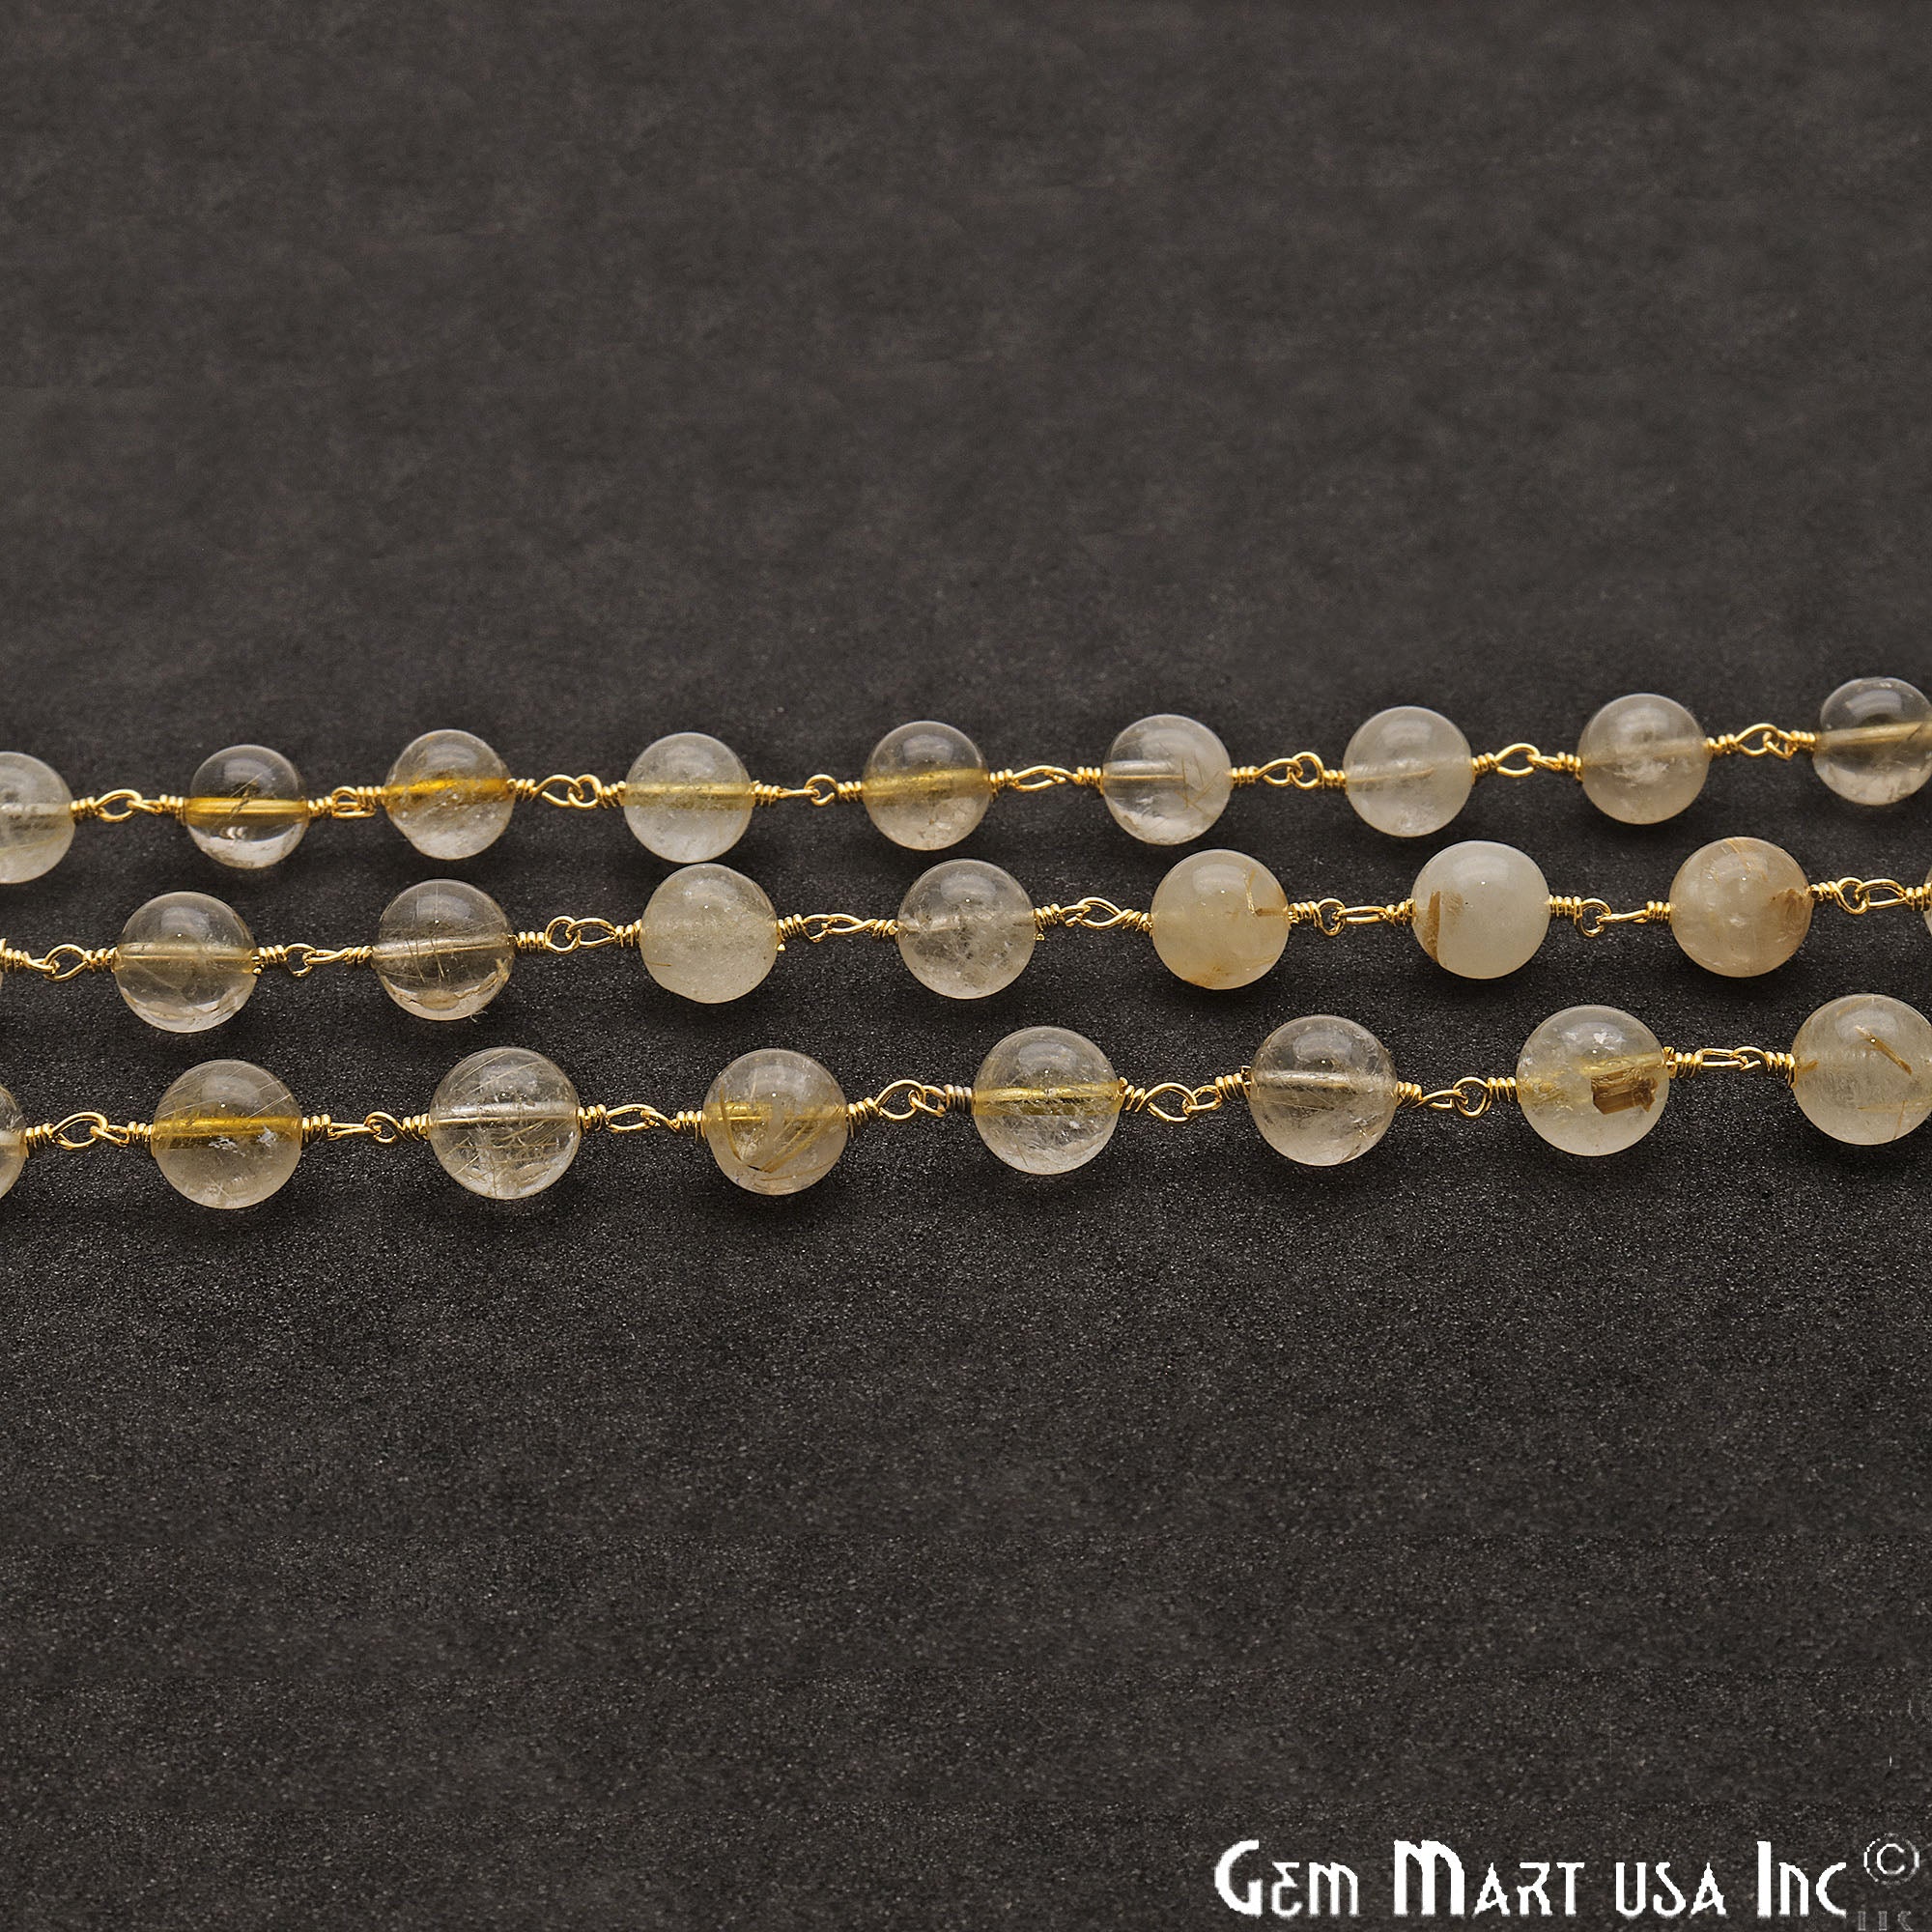 Golden Rutile Smooth Beads 8mm Gold Plated Wire Wrapped Rosary Chain - GemMartUSA